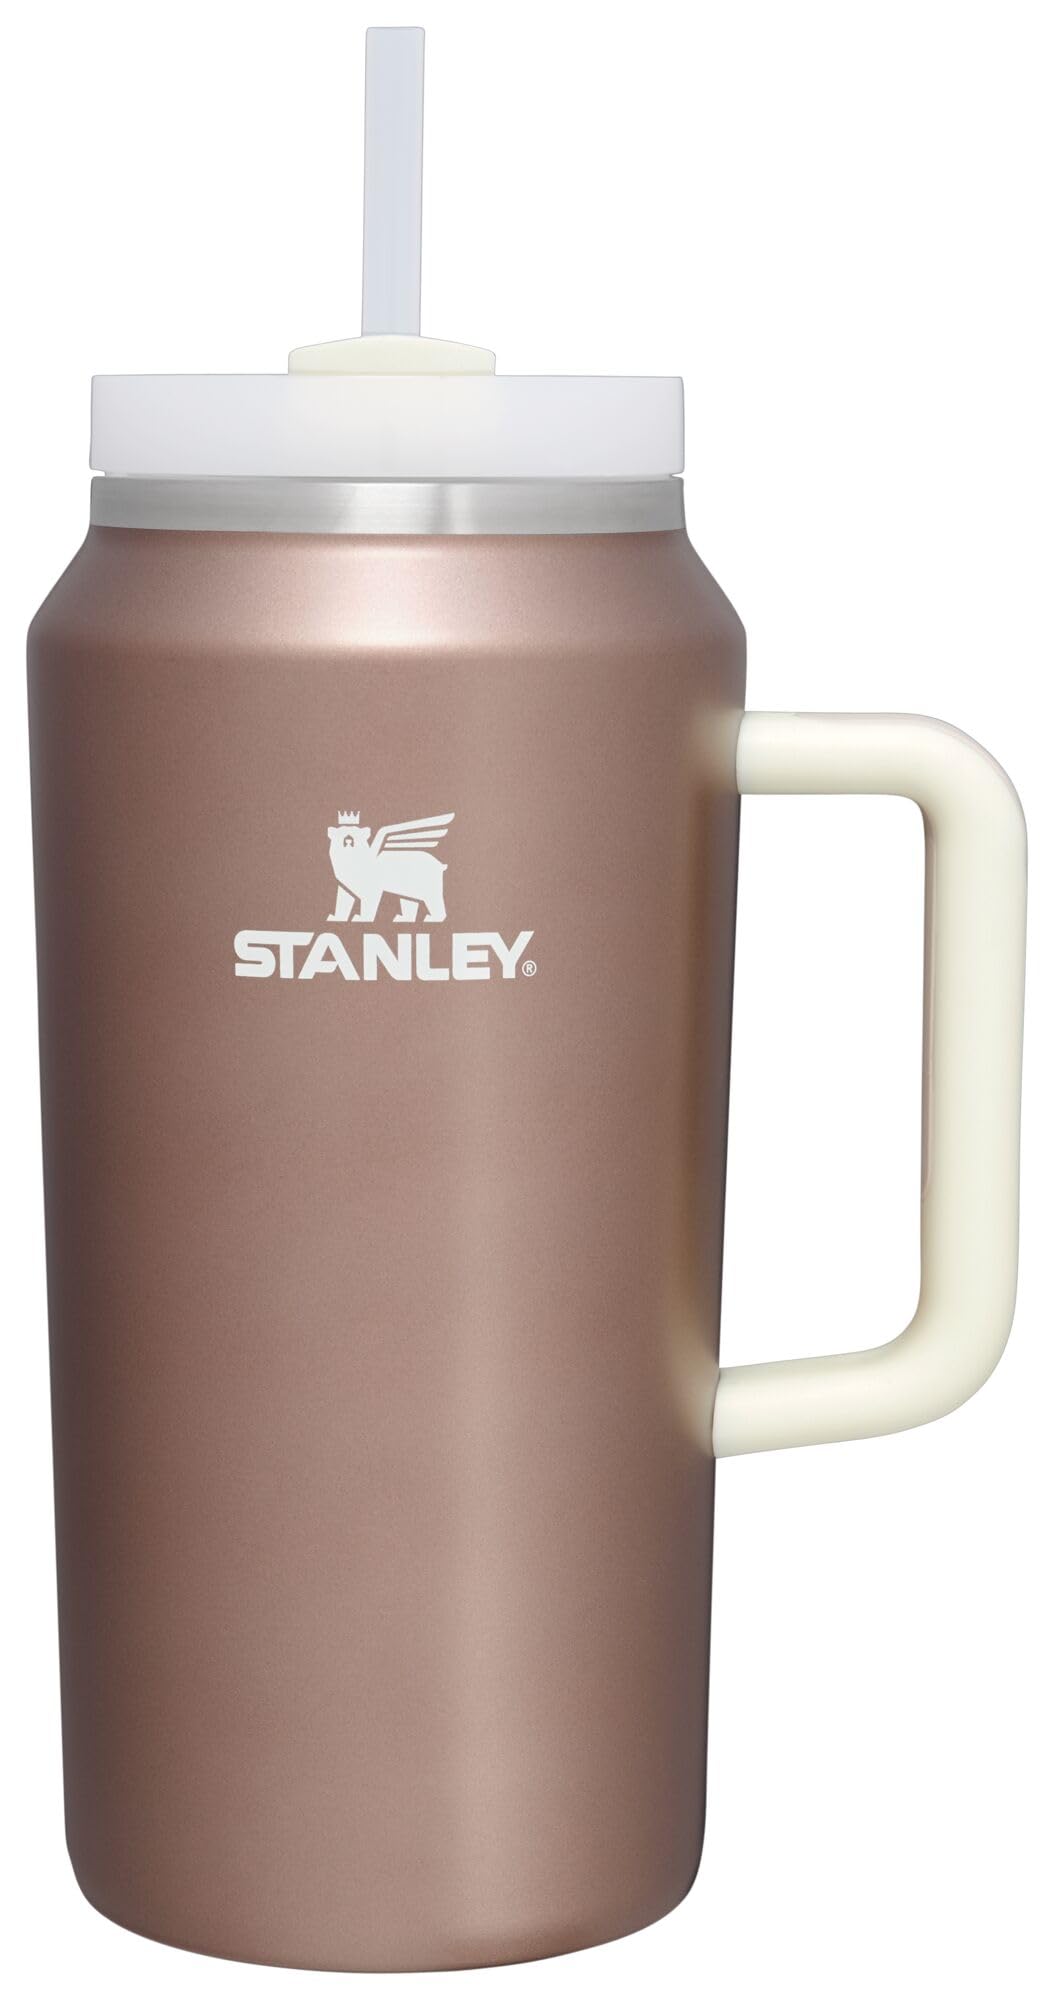 Tumbler - Stanley Quencher H2.0 FlowState Stainless Steel Vacuum Insulated Tumbler with Lid and Straw for Water, Iced Tea or Coffee